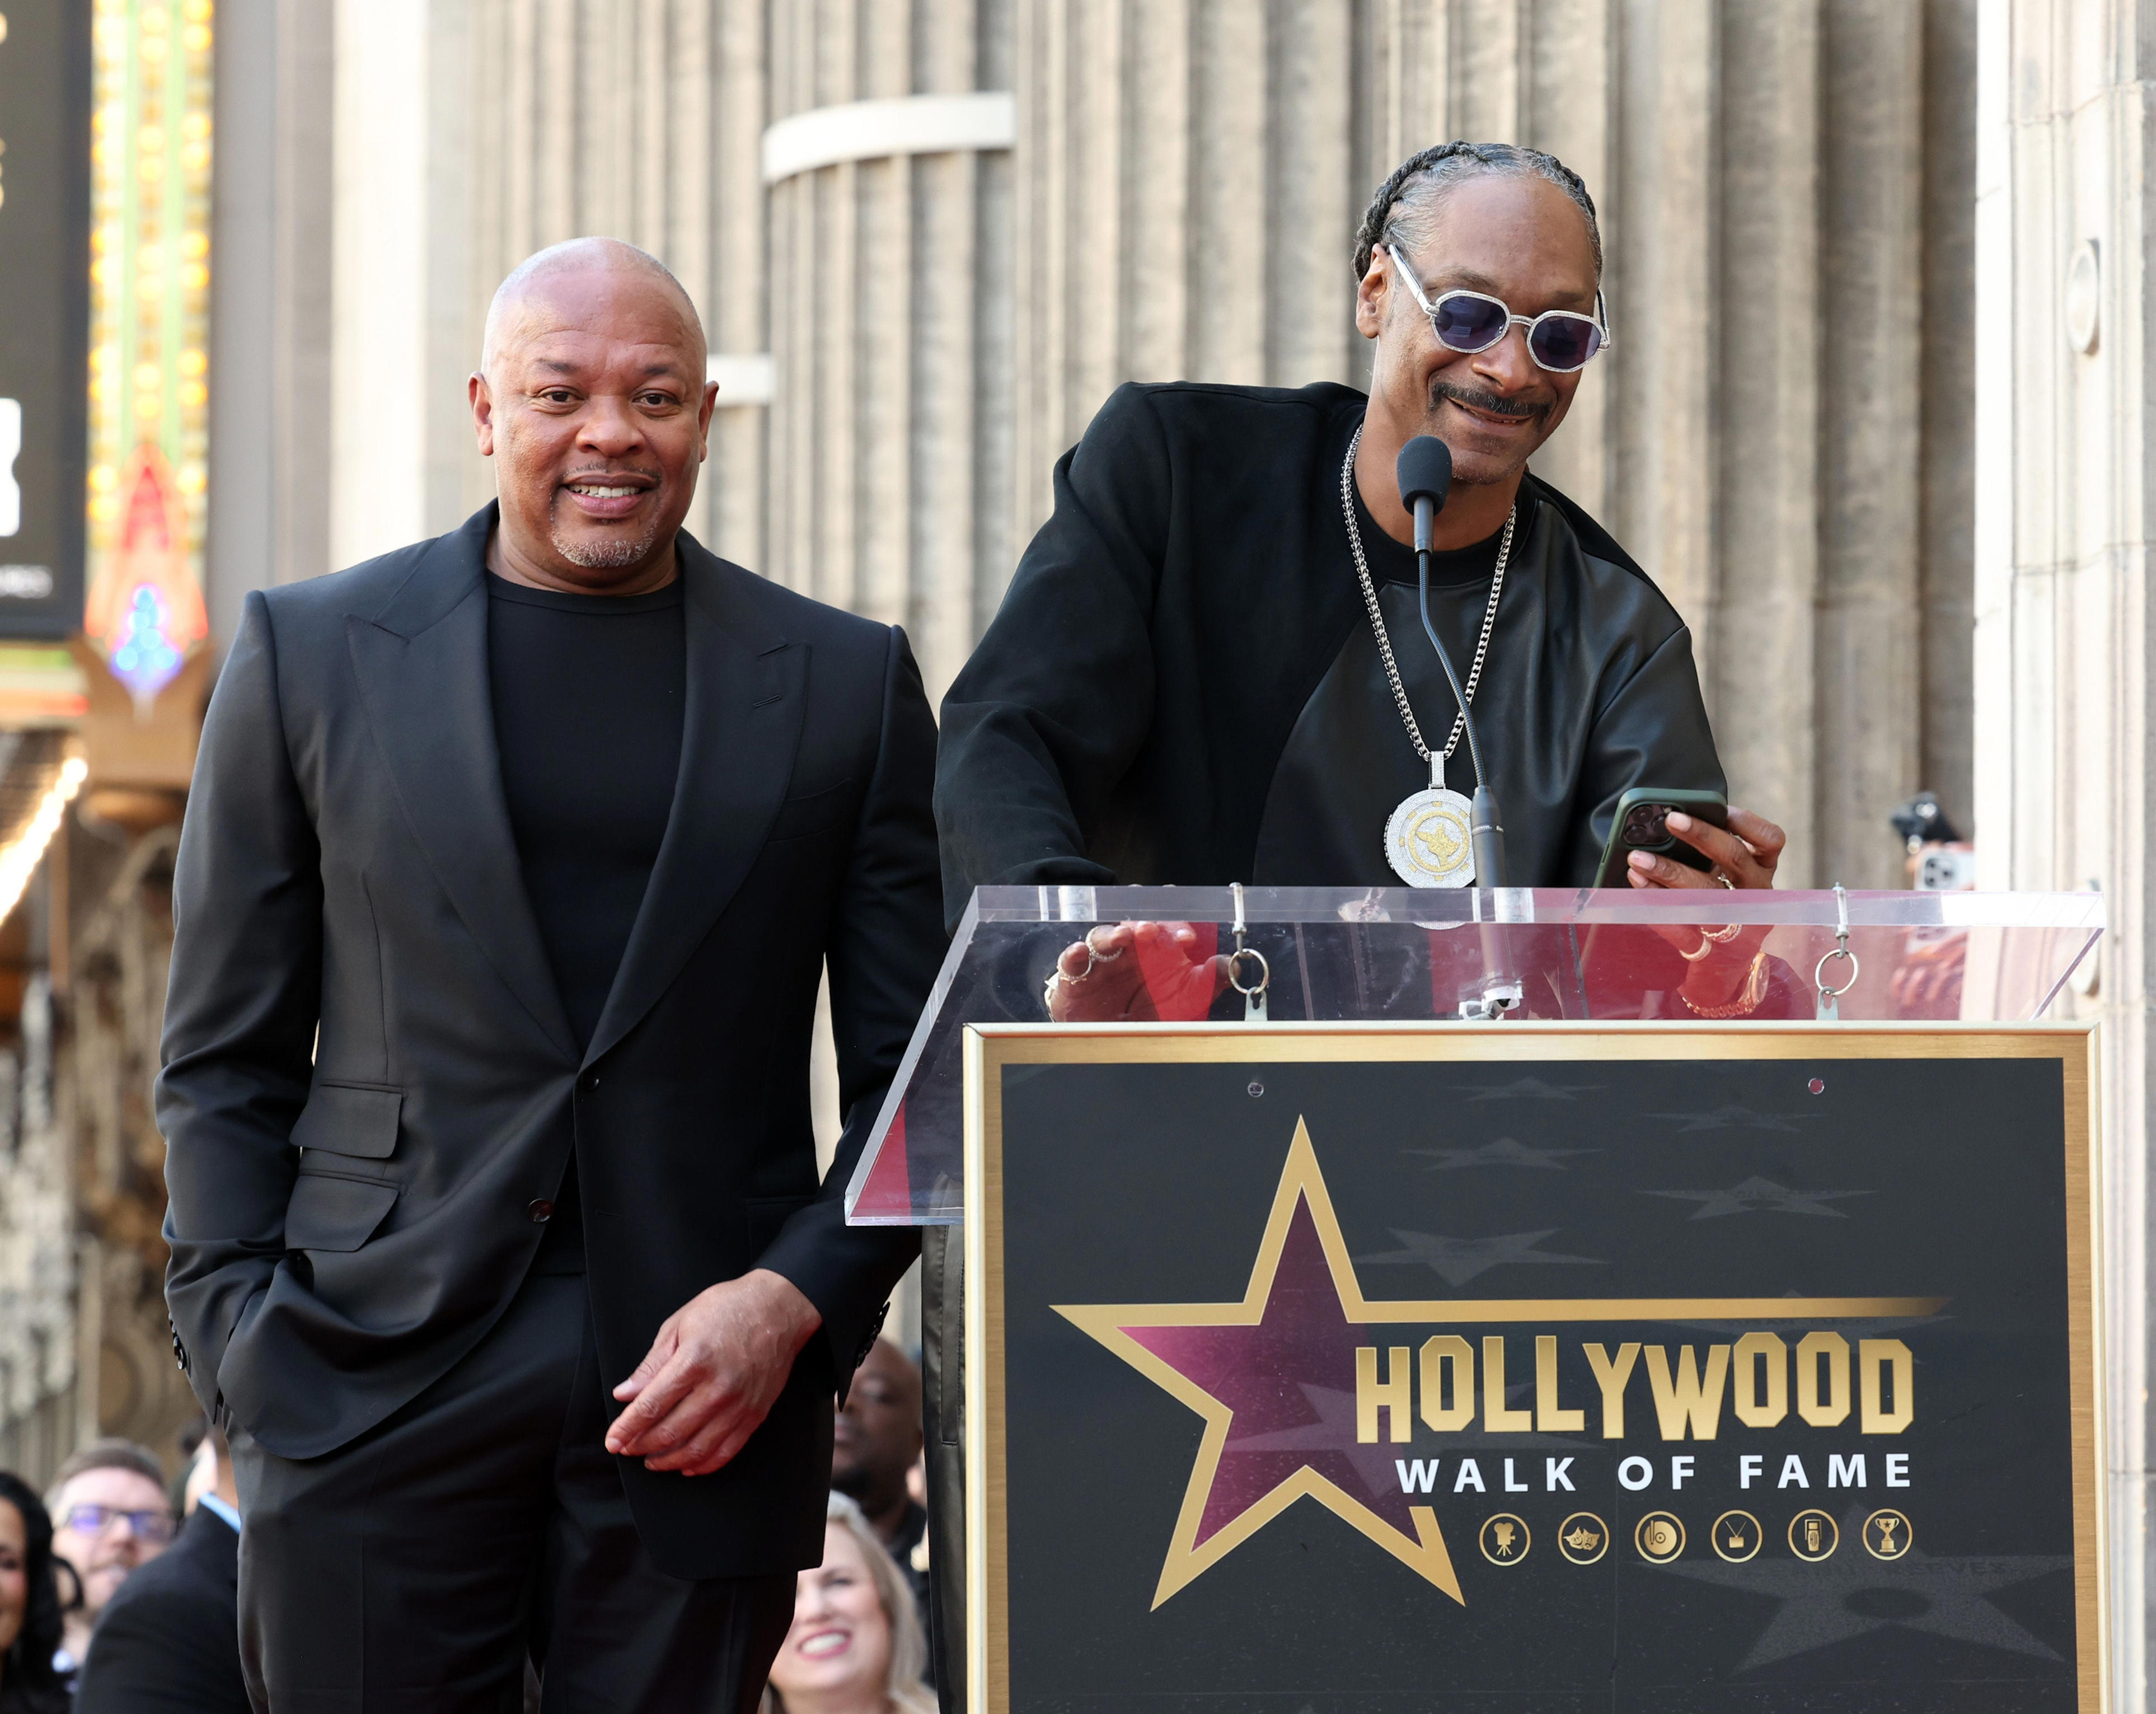 Snoop Dogg gave a speech honoring Dr. Dre during the ceremony.